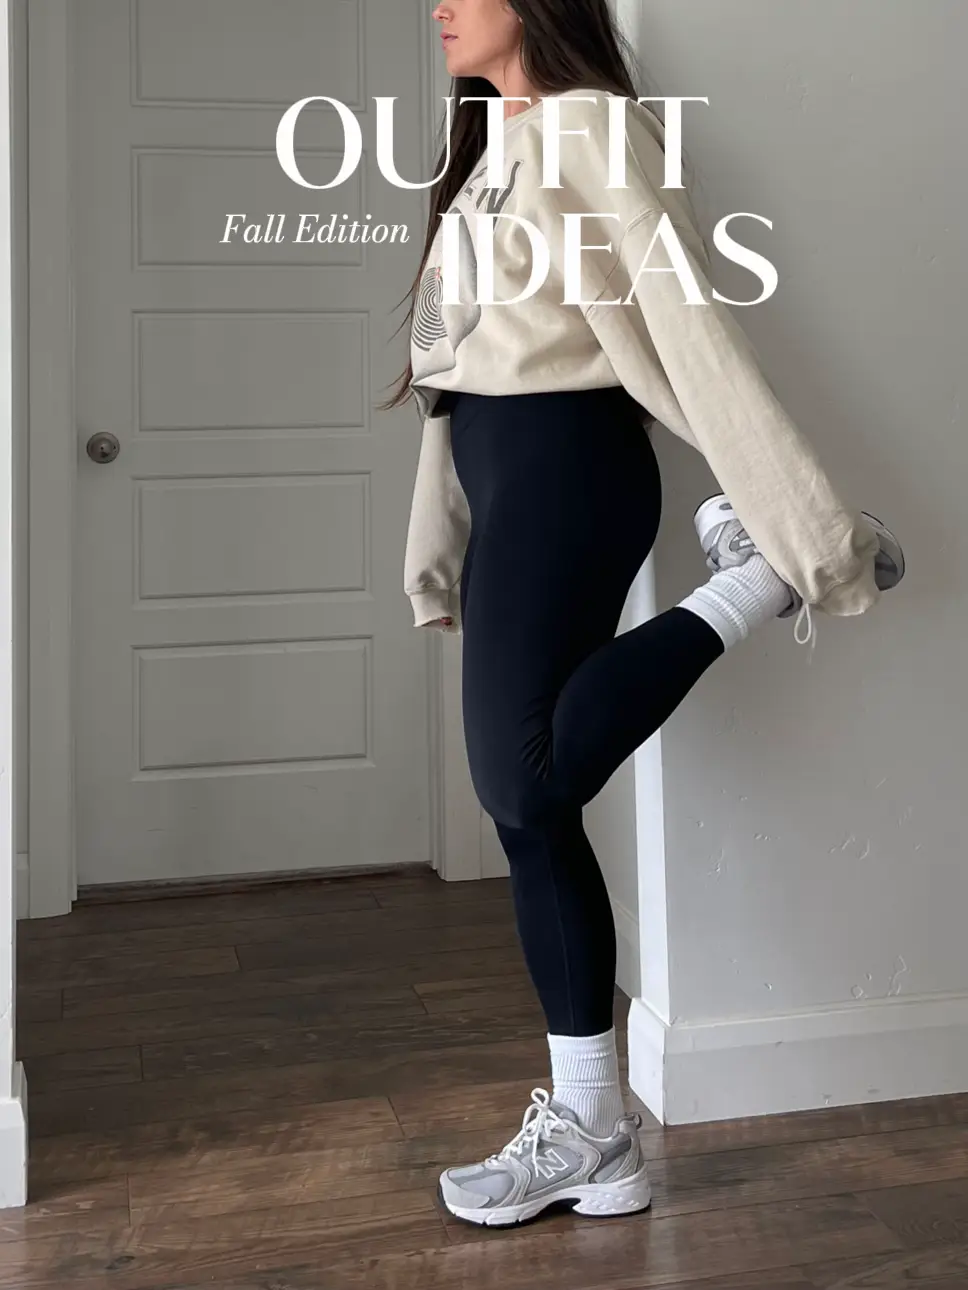 Outfit Ideas for Fall I will be recreating, Gallery posted by Taylor  Larson